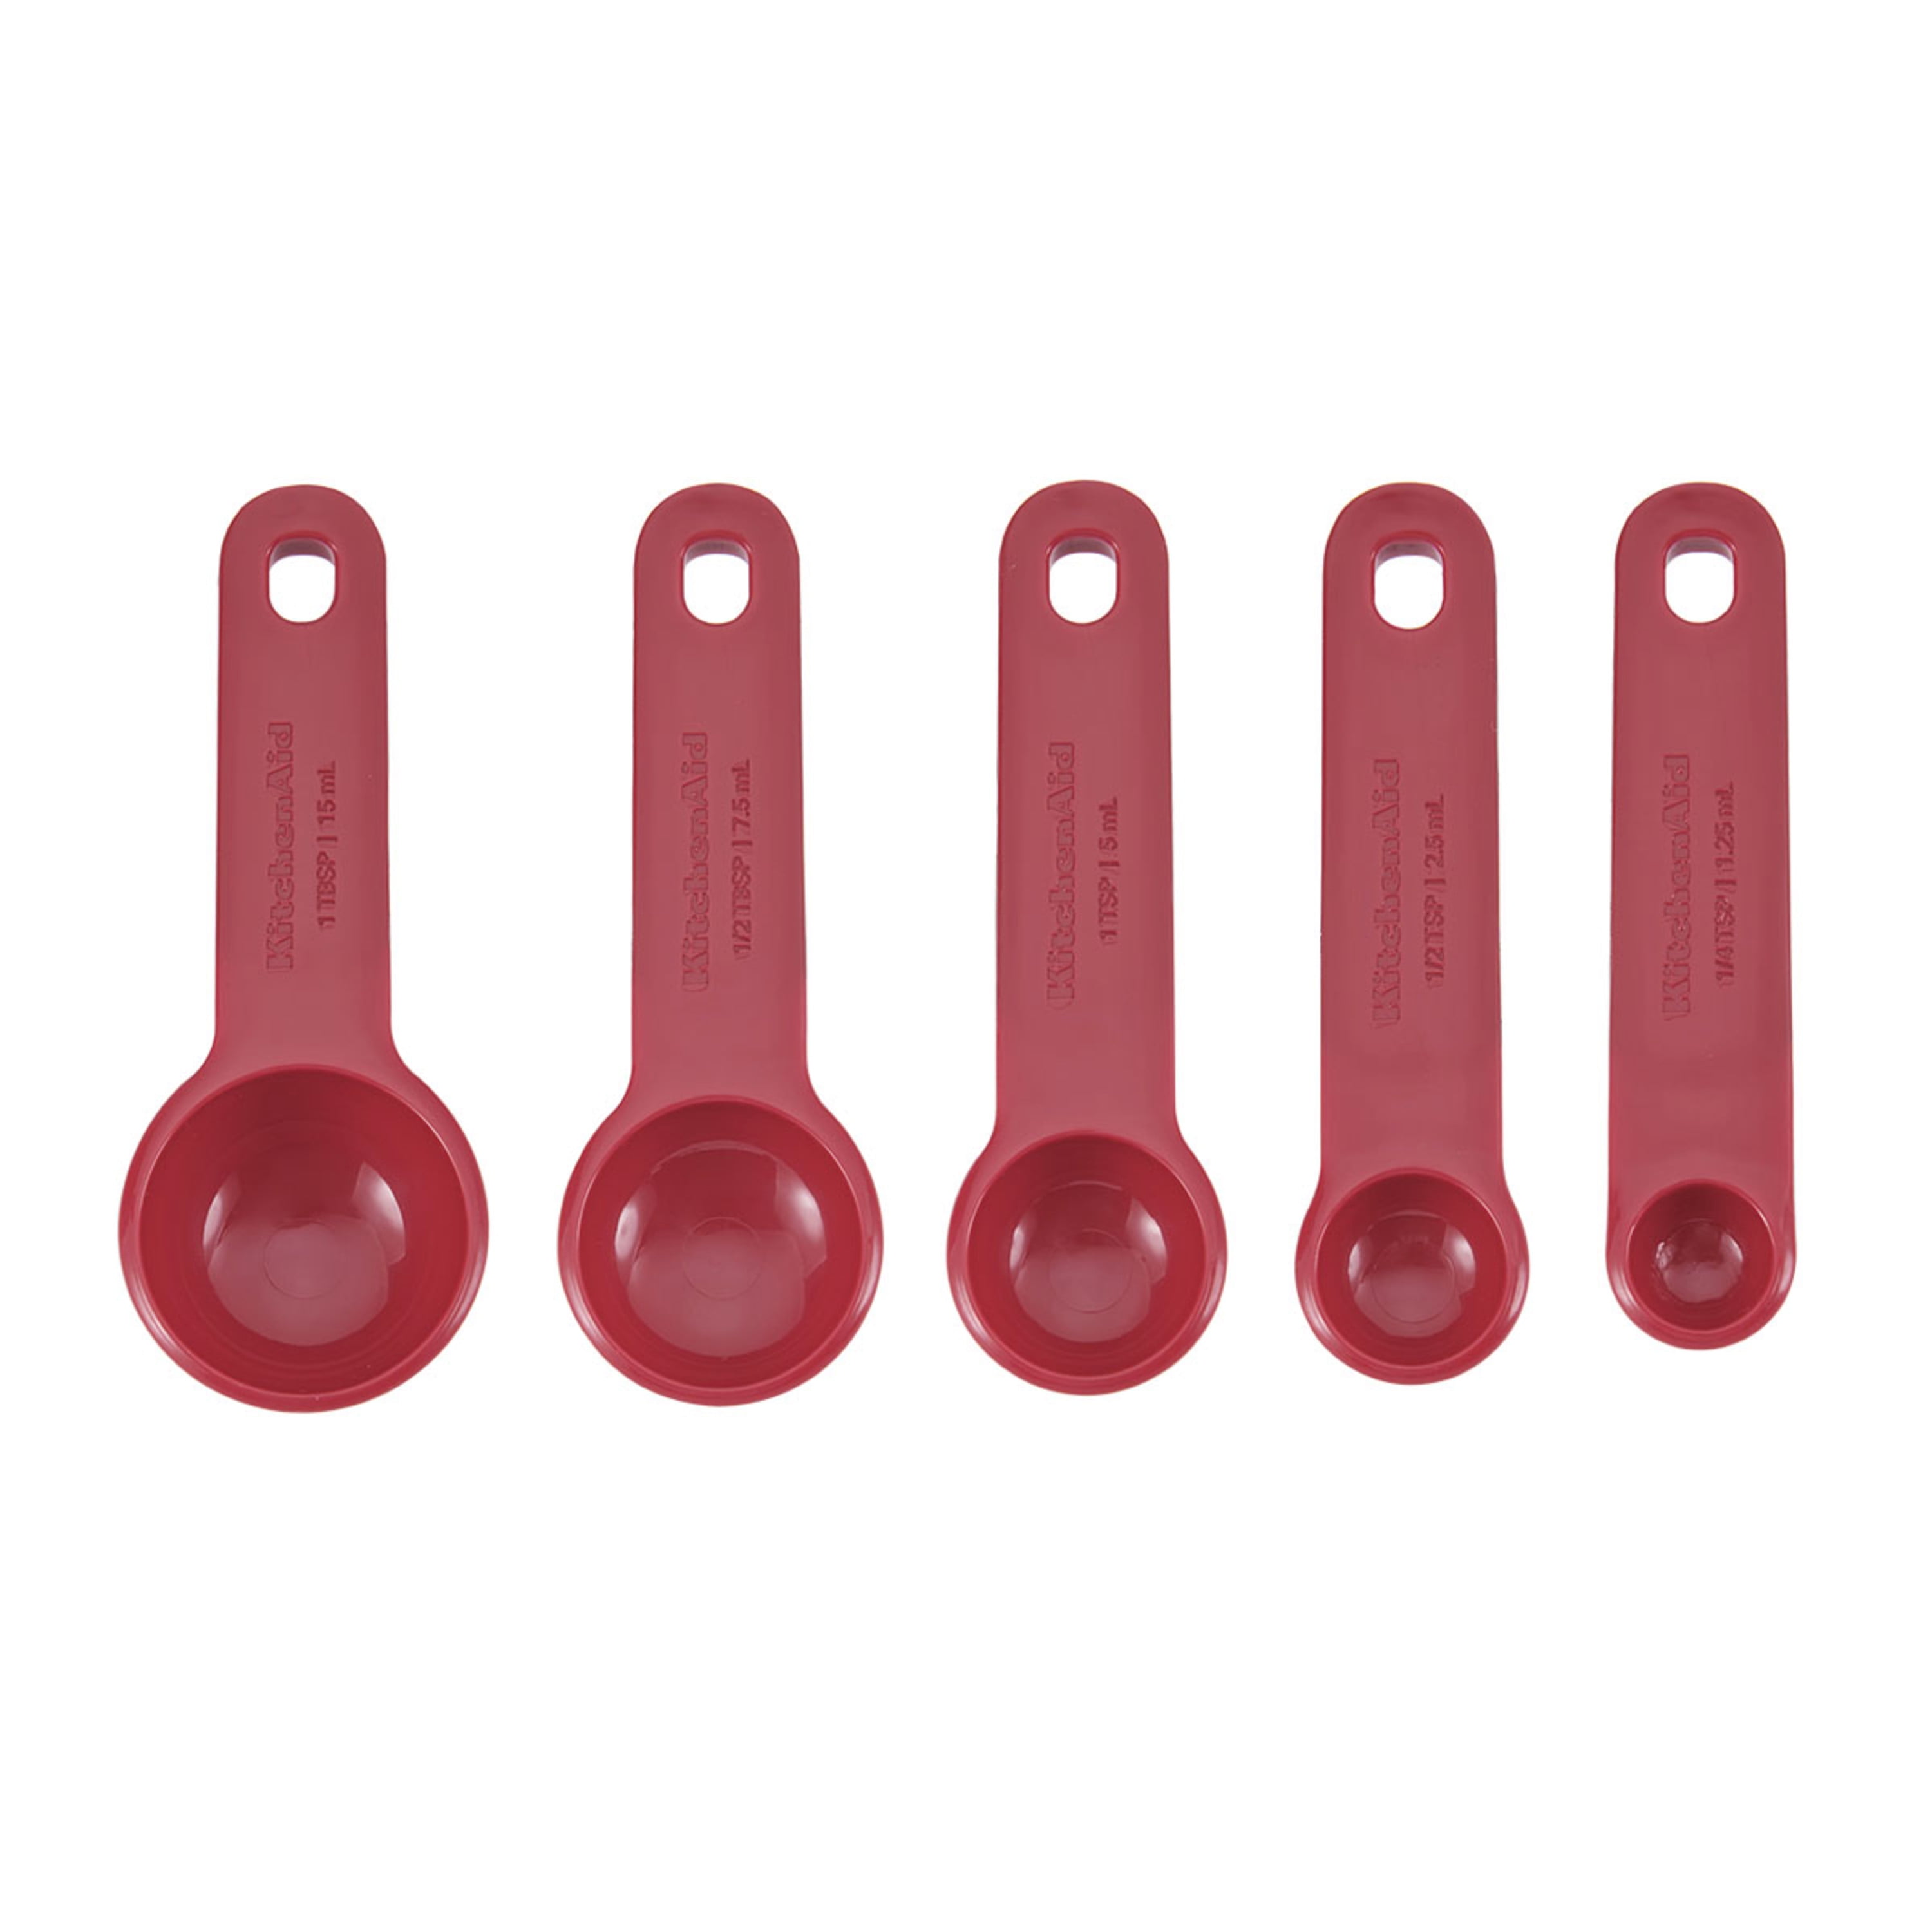 KitchenAid Self Leveling Measuring Spoon Set 6 Spoons for sale online